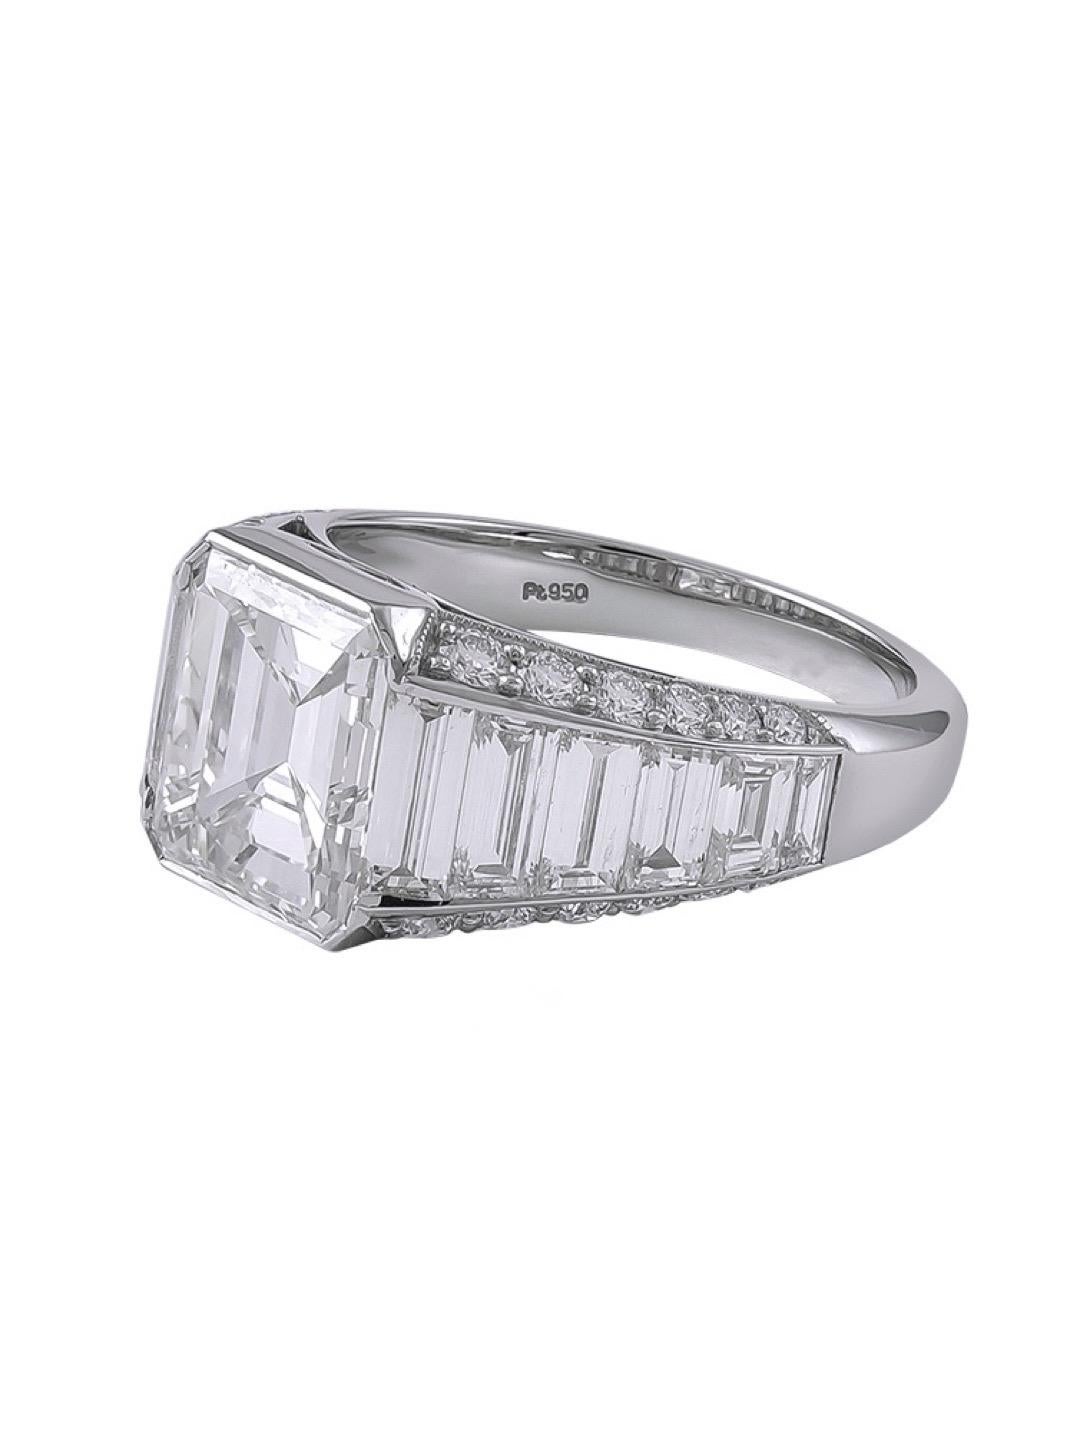 An impeccable GIA certified 3.01 Carat Emerald Cut Diamond Ring with a color and clarity of I-VVS2 with 2.16 Carat of baguette cut diamonds and 0.47 carat small diamonds. 

Available for resizing.

Sophia D by Joseph Dardashti LTD has been known